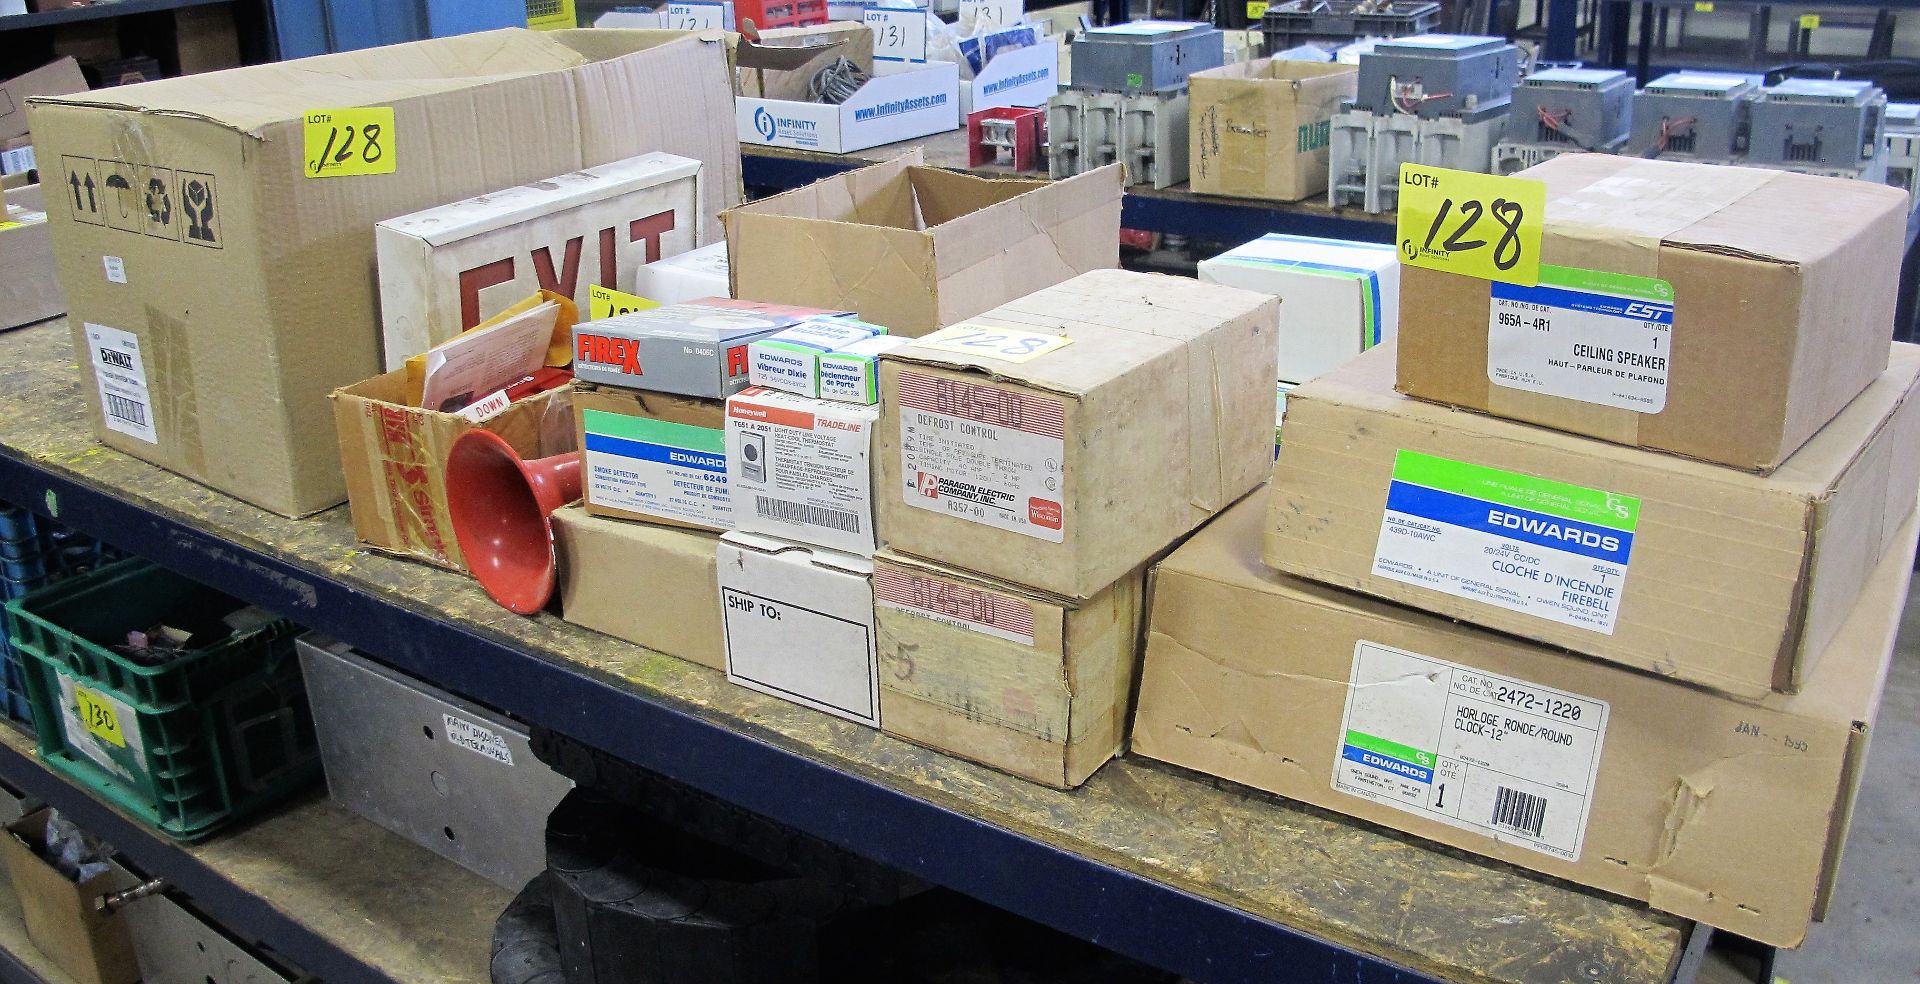 LOT ASST. FIRE SAFETY EQUIPMENT, FIRE ALARMS, SMOKE ALARMS, EXIT SIGNS, BUZZERS, FIRE BELLS, ETC.